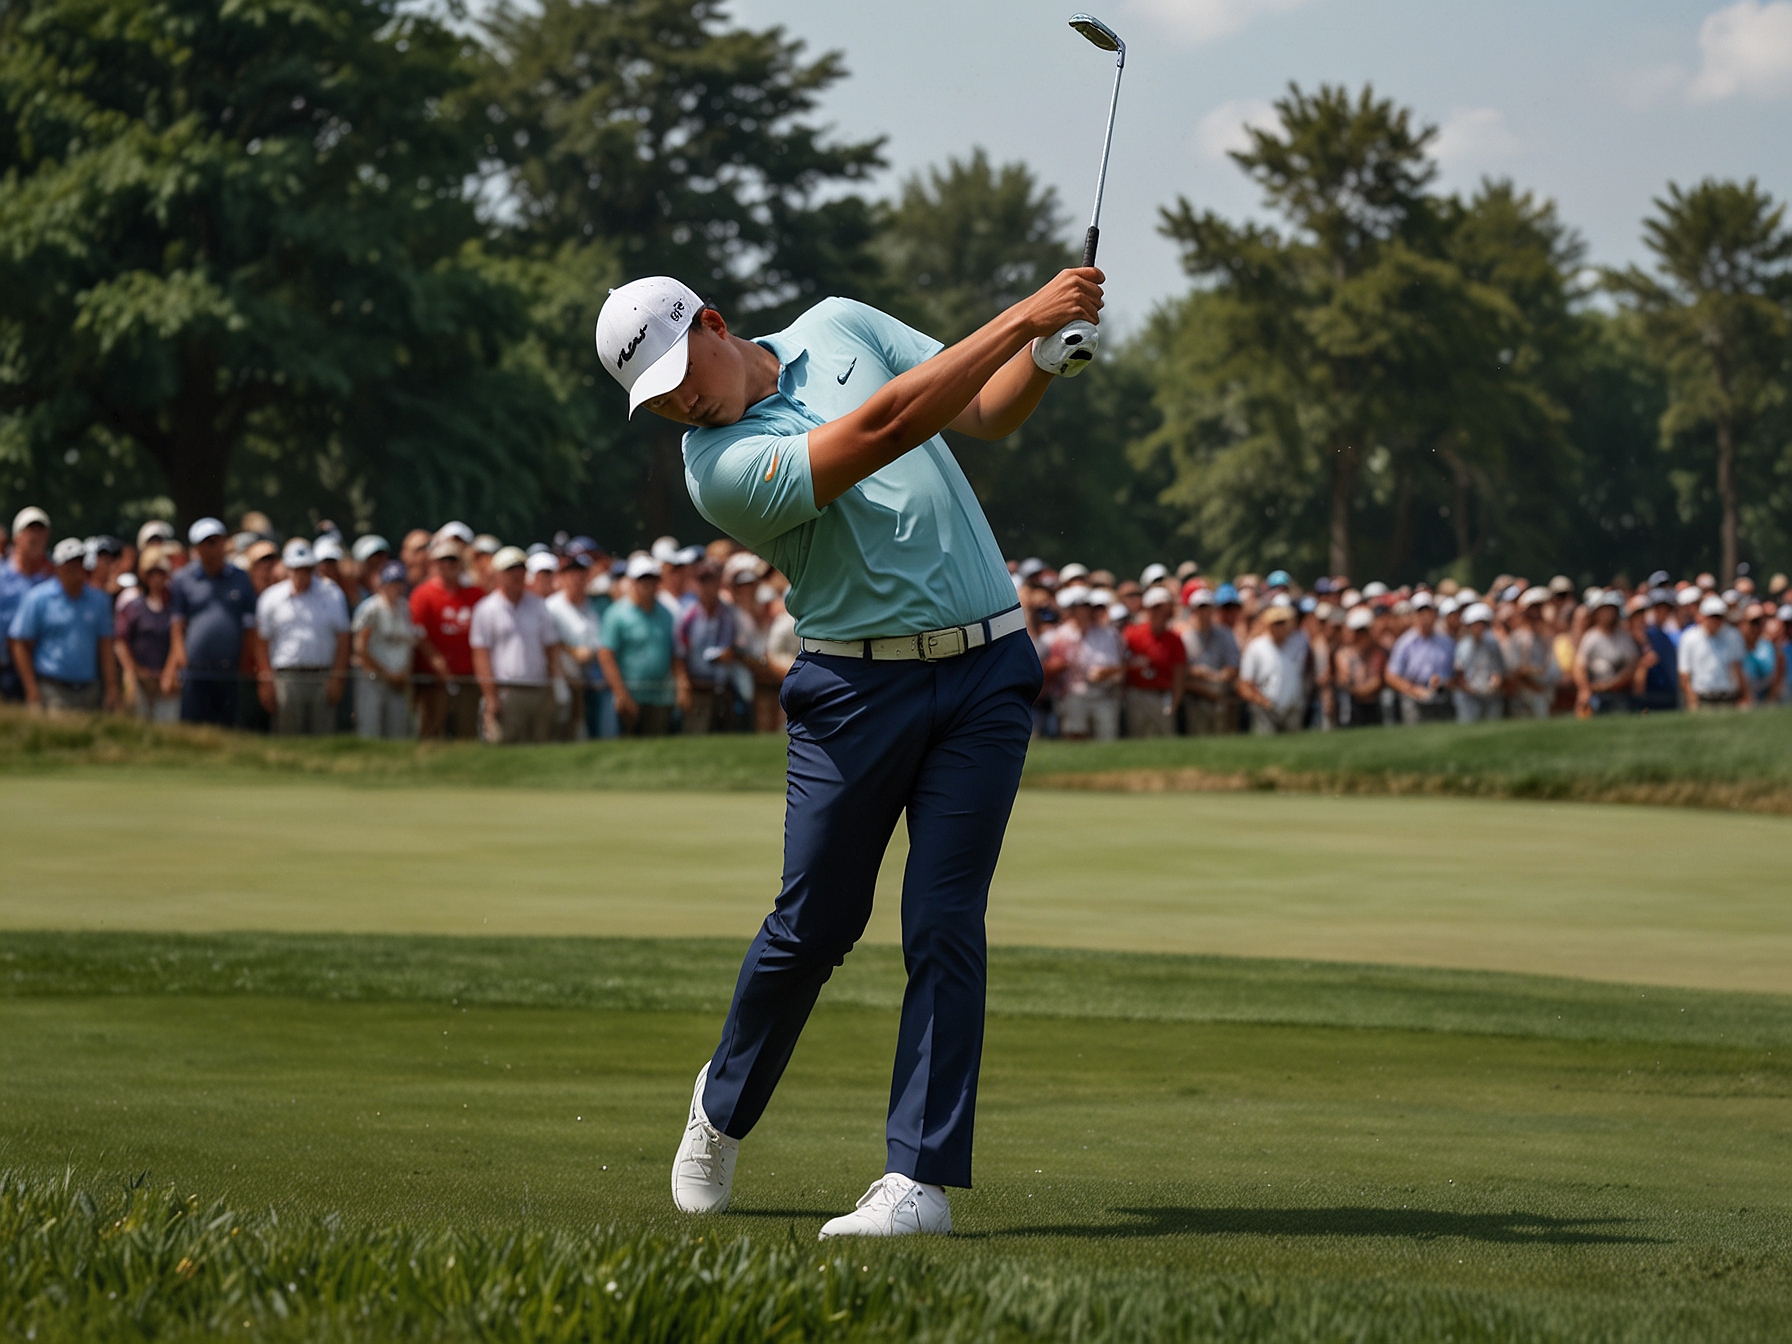 Tom Kim tees off during the final round at the Travelers Championship, showcasing his precision and focused gameplay as he maintains his one-shot lead.